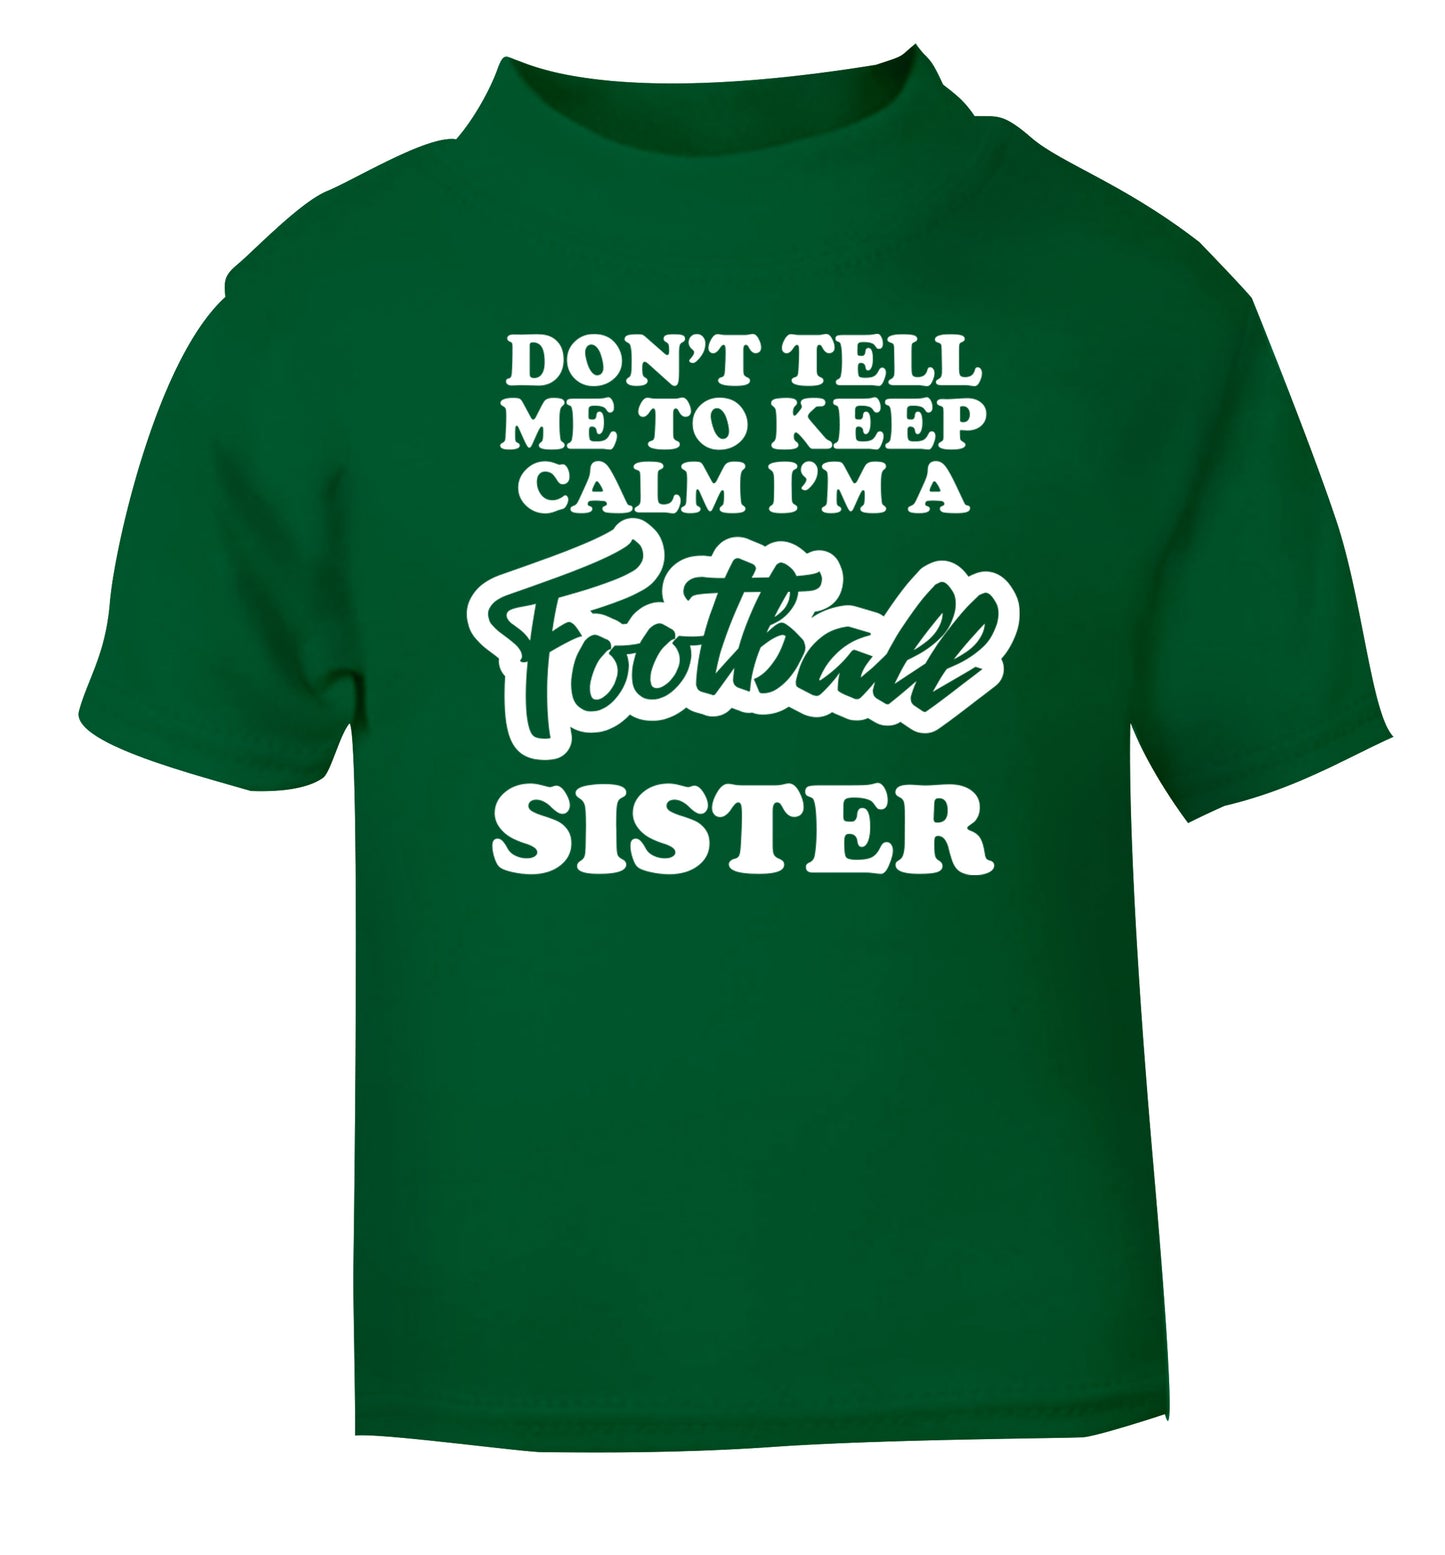 Don't tell me to keep calm I'm a football sister green Baby Toddler Tshirt 2 Years